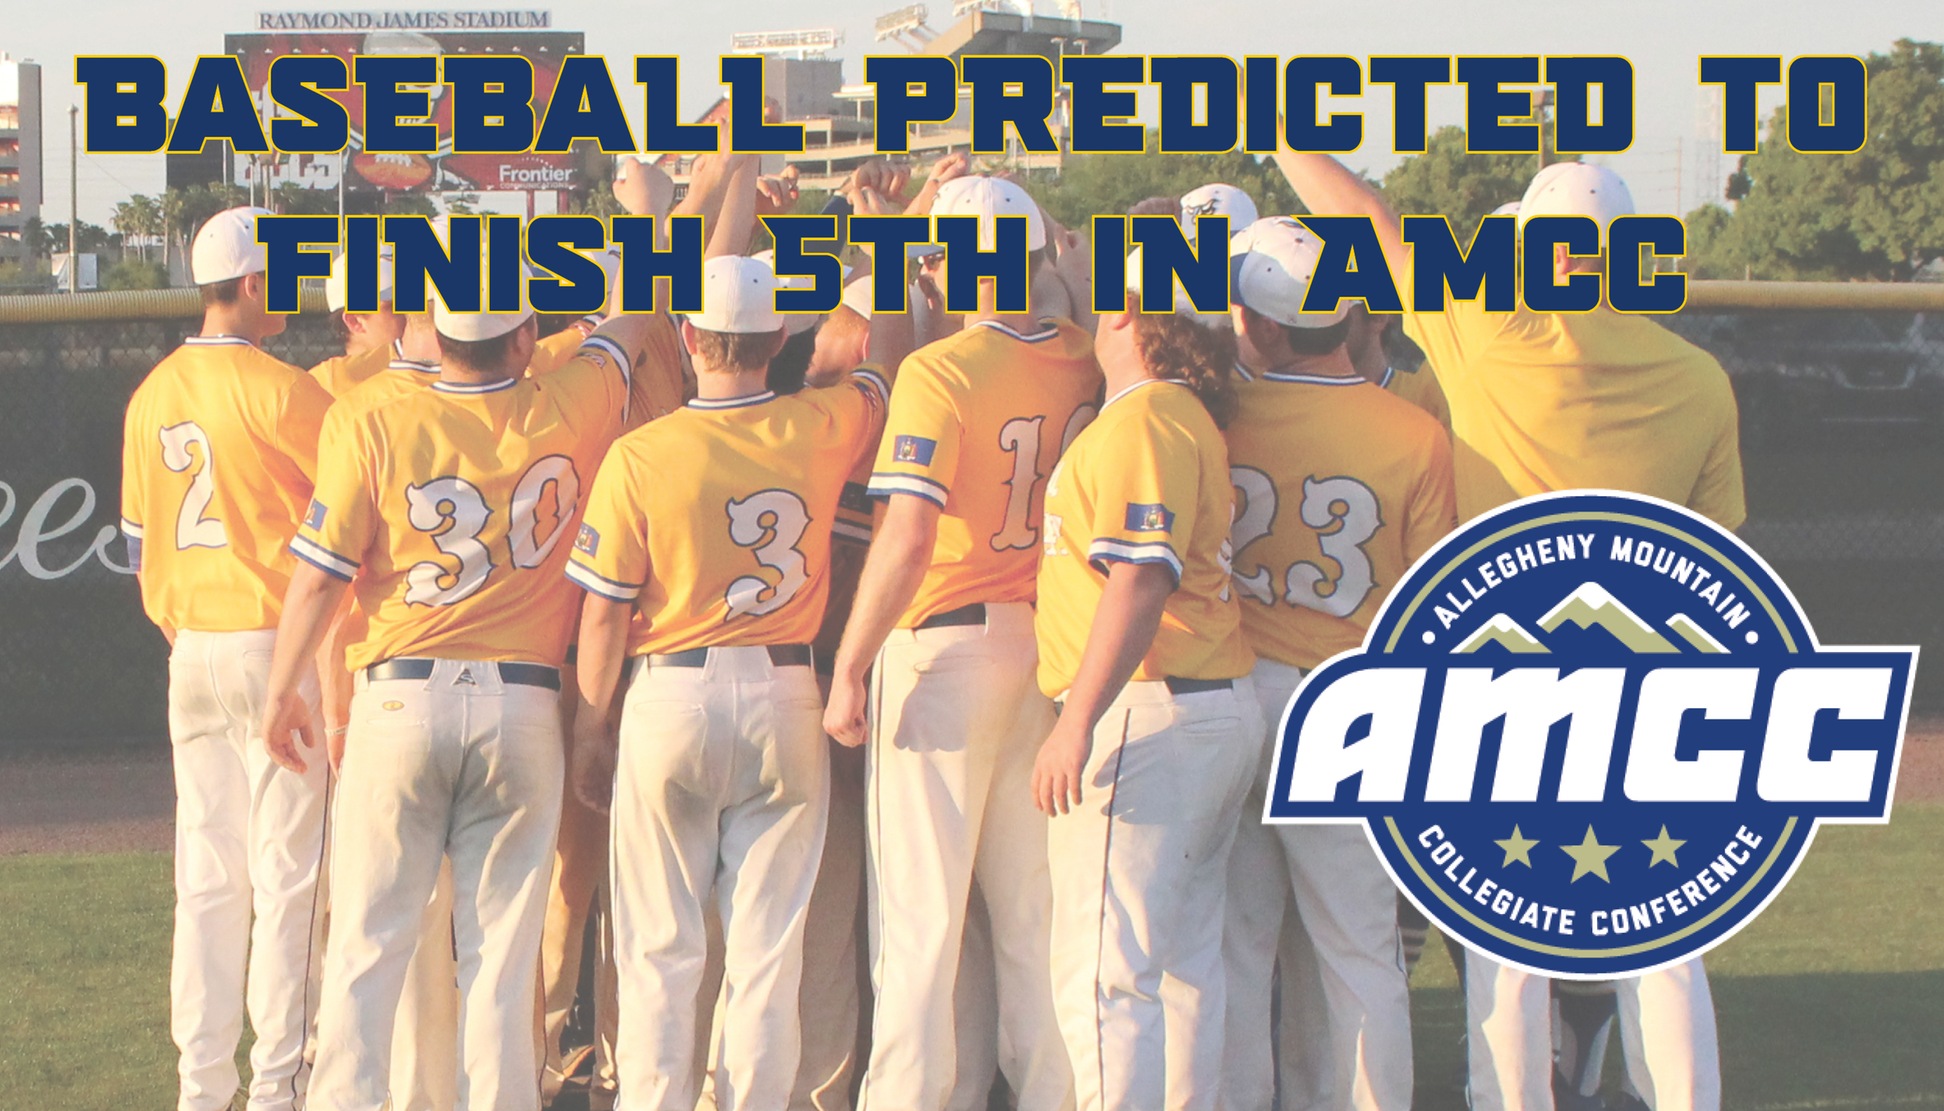 Baseball team predicted to finish 5th in AMCC